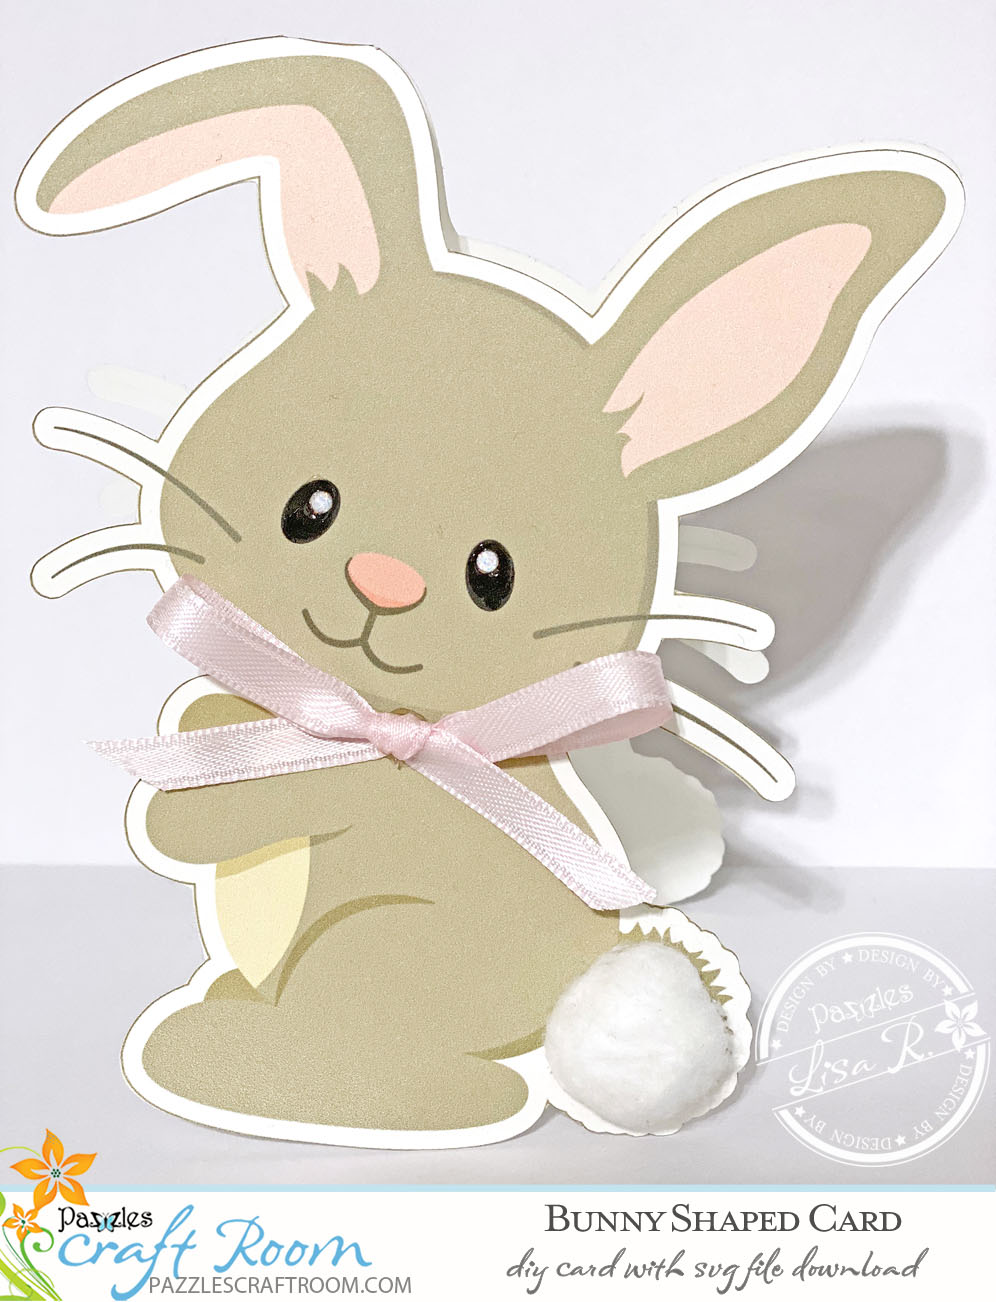 Pazzles DIY Bunny Card with instant SVG download. Compatible with all major electronic cutters including Pazzles Inspiration, Cricut, and Silhouette Cameo. Design by Lisa Reyna.